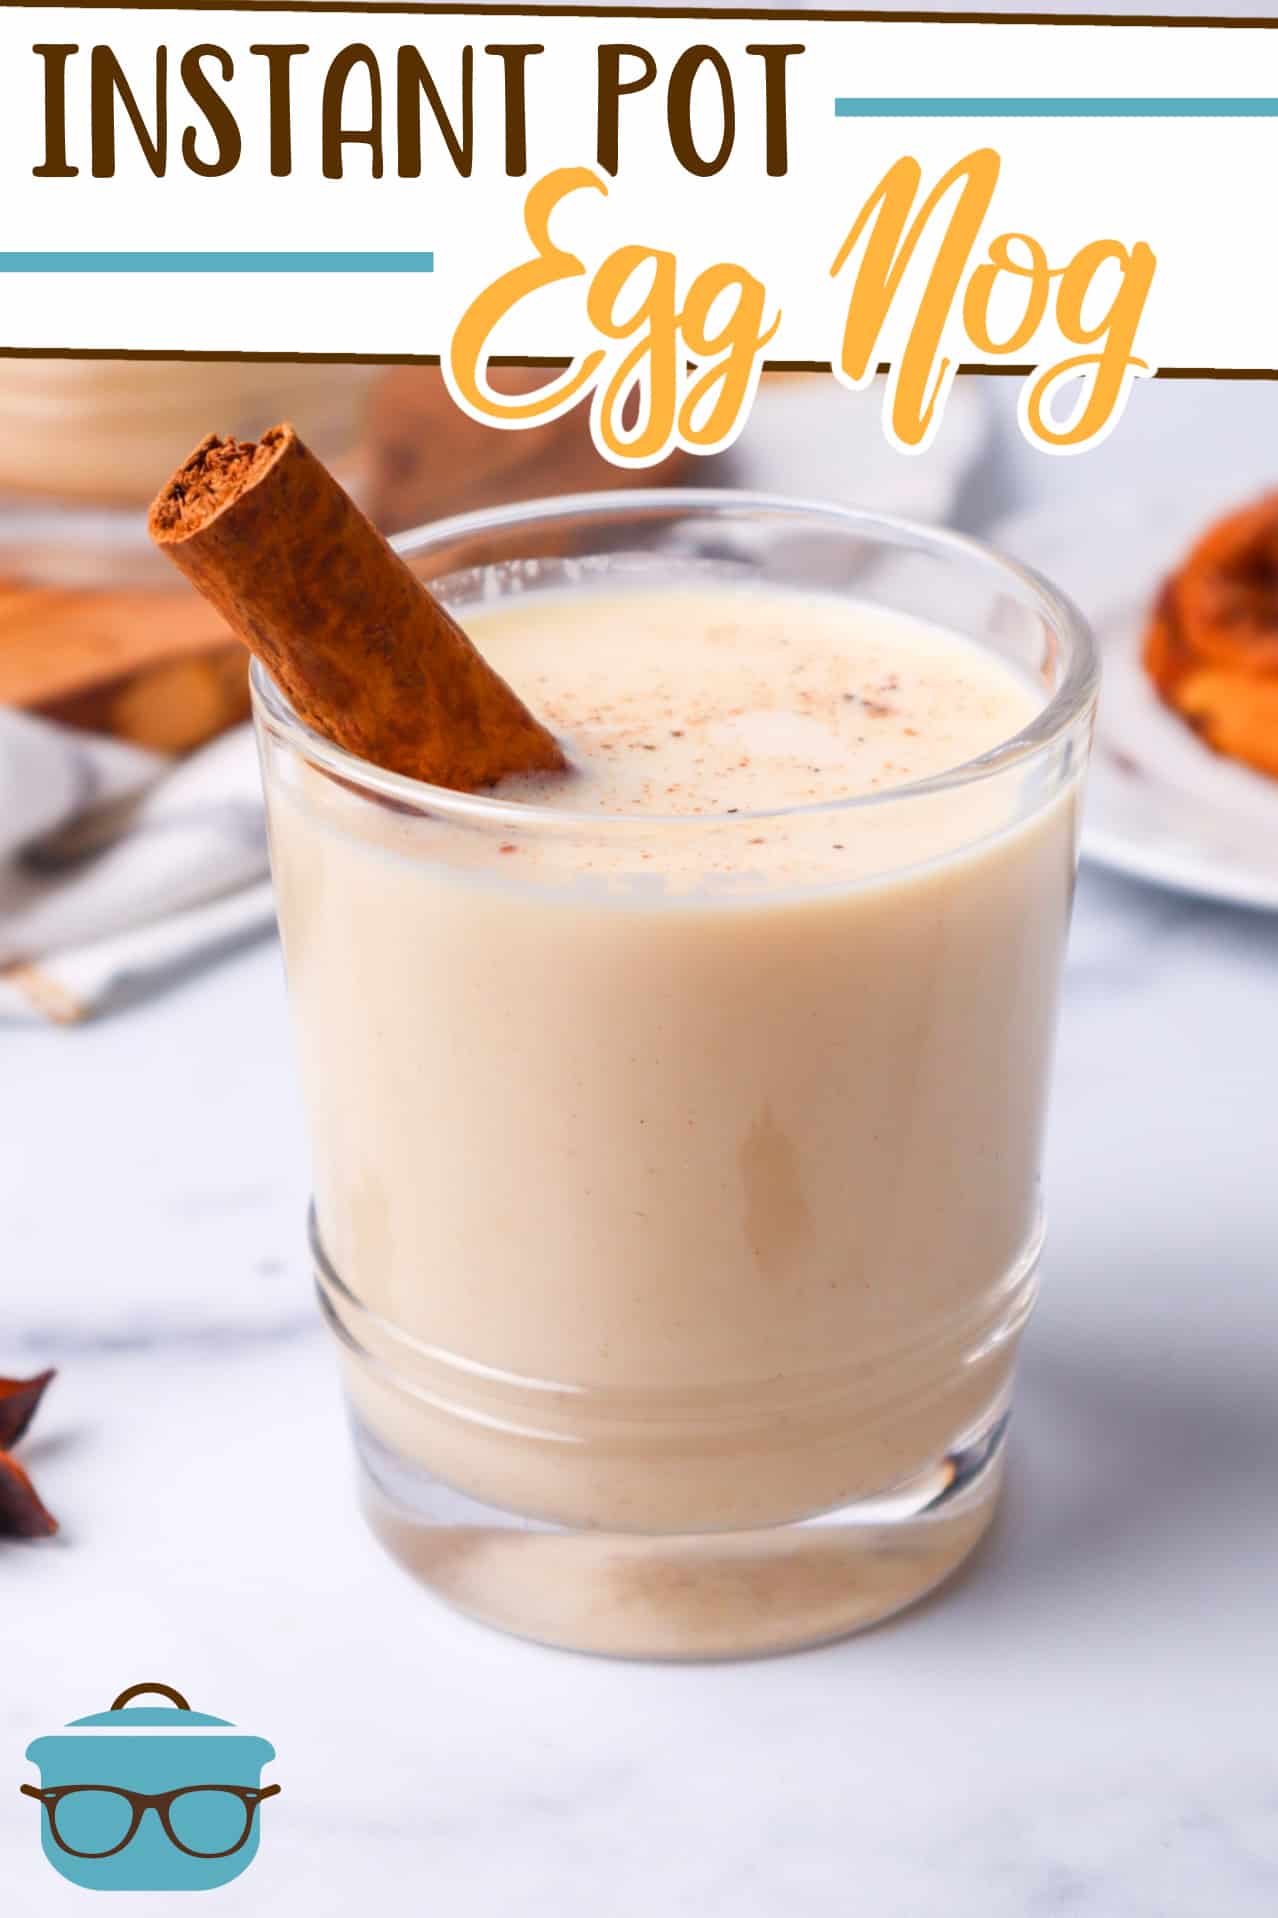 Instant Pot Egg Nog recipe from The Country Cook, pictured in a small glass with a cinnamon stick, shown on a marble surface.